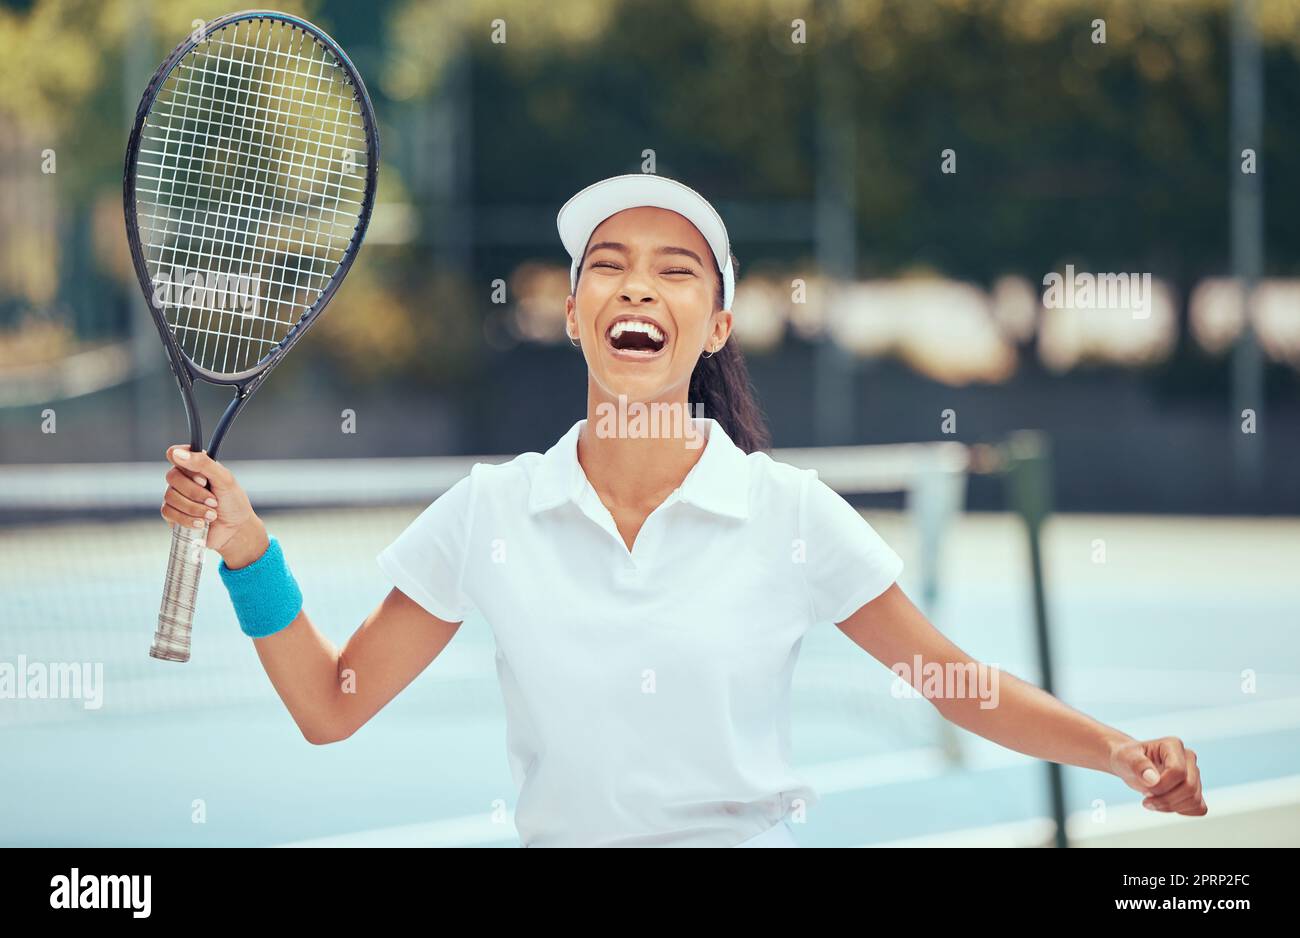 Victory, winner and tennis player woman celebrating with racket after winning a competition or tournament match at an outdoor court. Happy, excited and a fit sports woman after playing a good game Stock Photo